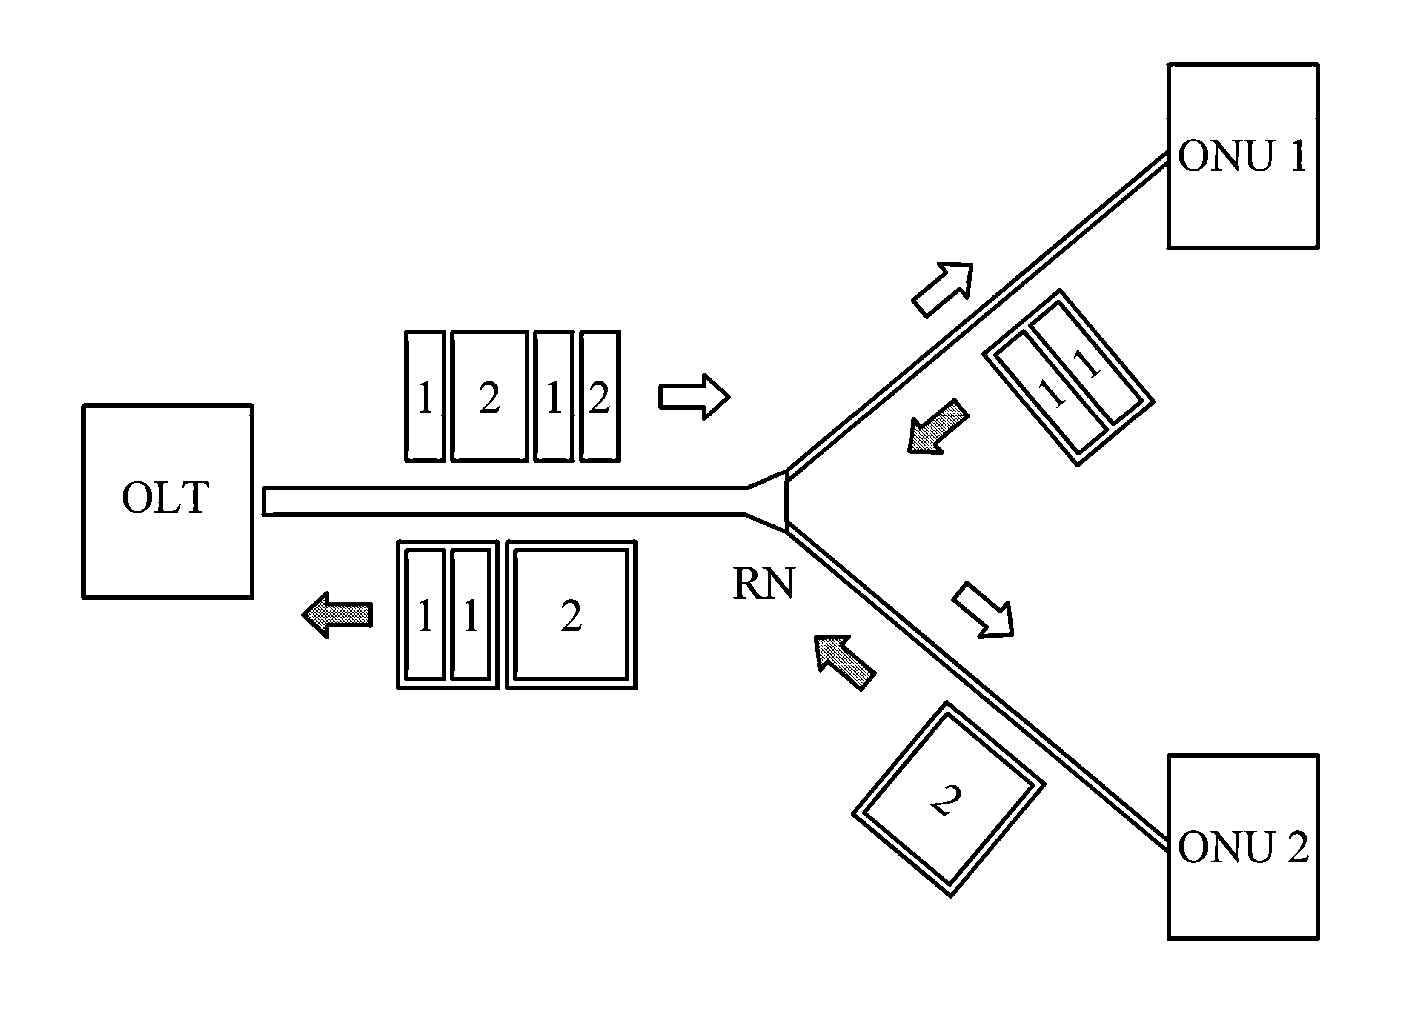 Passive optical network system using time division multiplexing